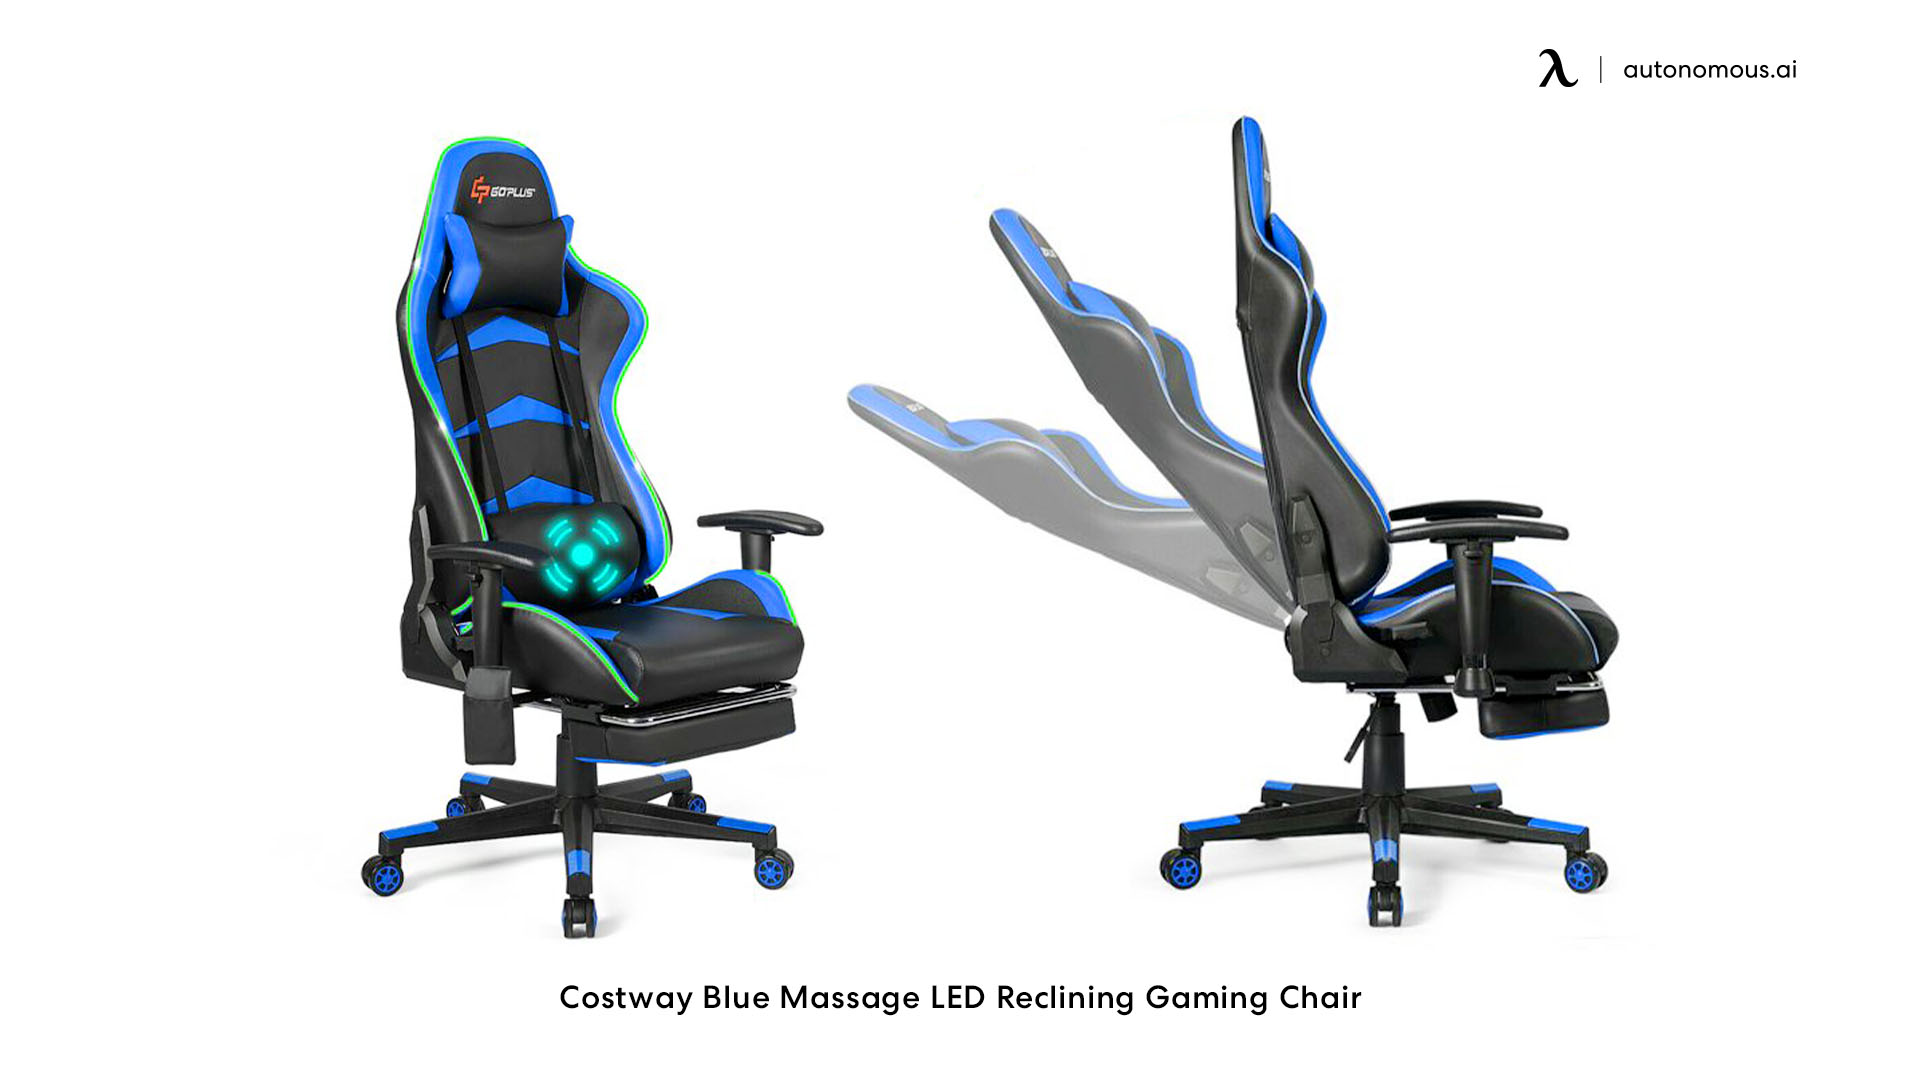 Costway Blue Massage LED Reclining Gaming Chair